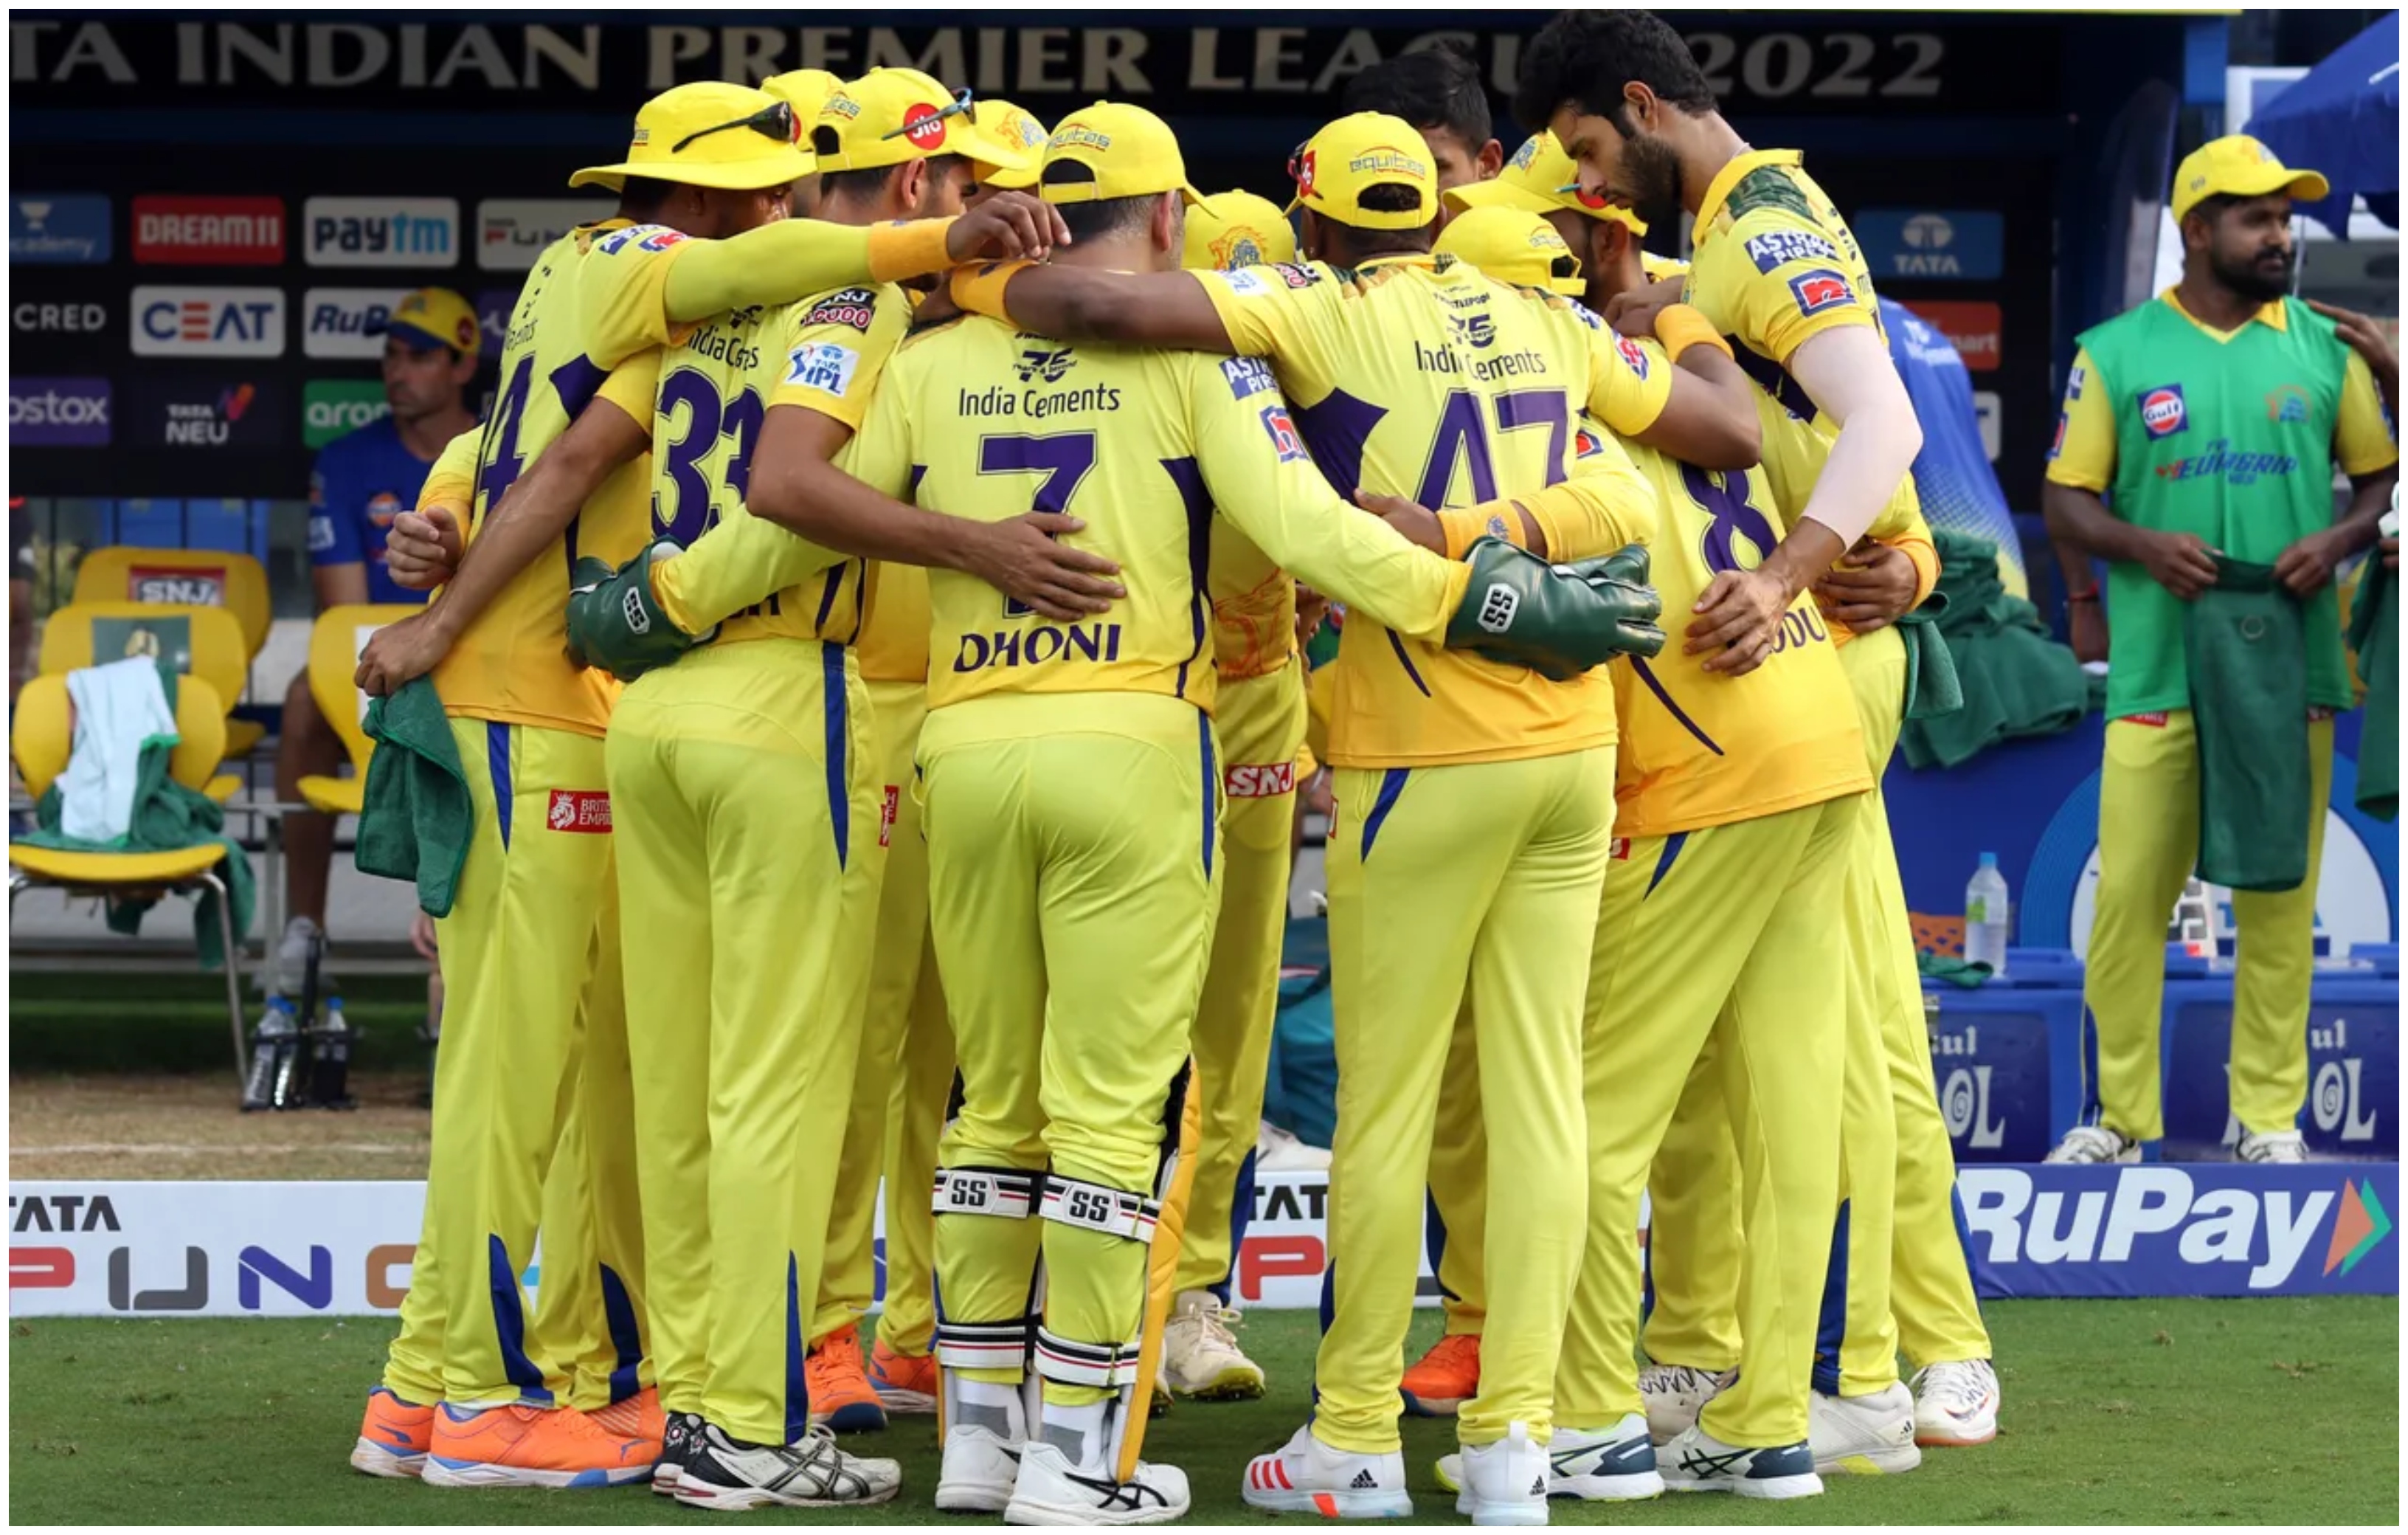 CSK have clinched the IPL title as many as four times | BCCI/IPL